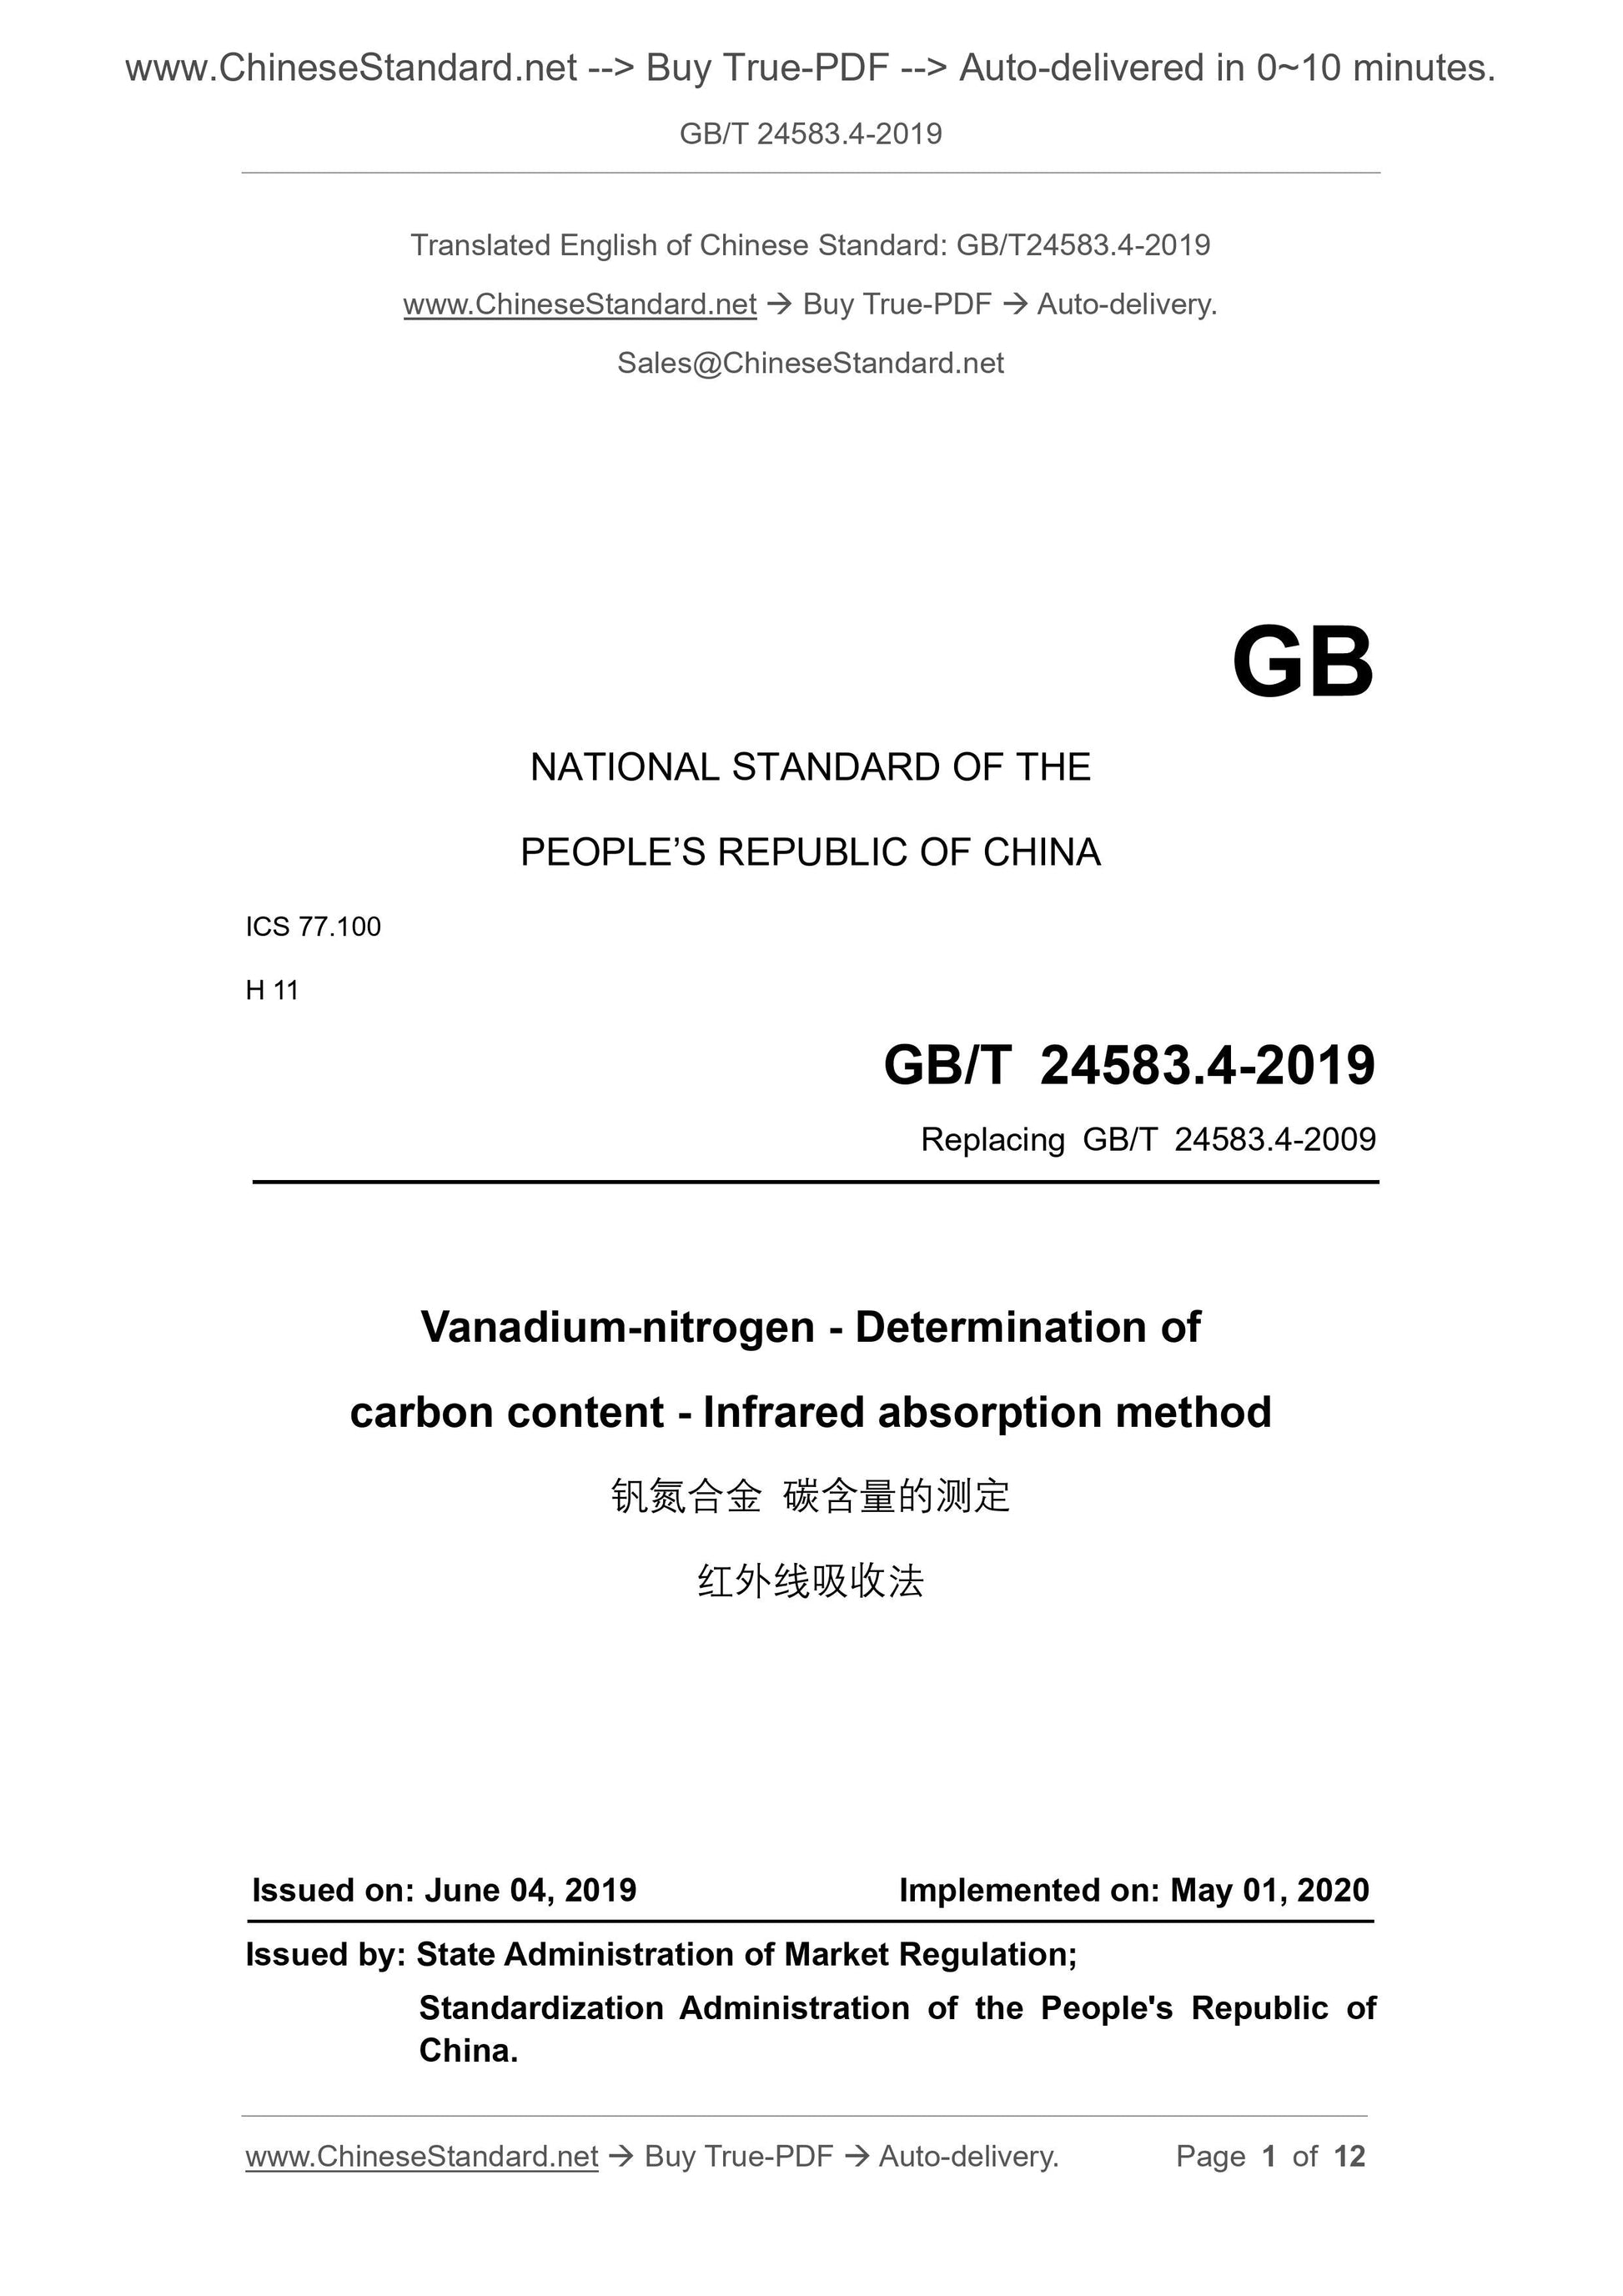 GB/T 24583.4-2019 Page 1